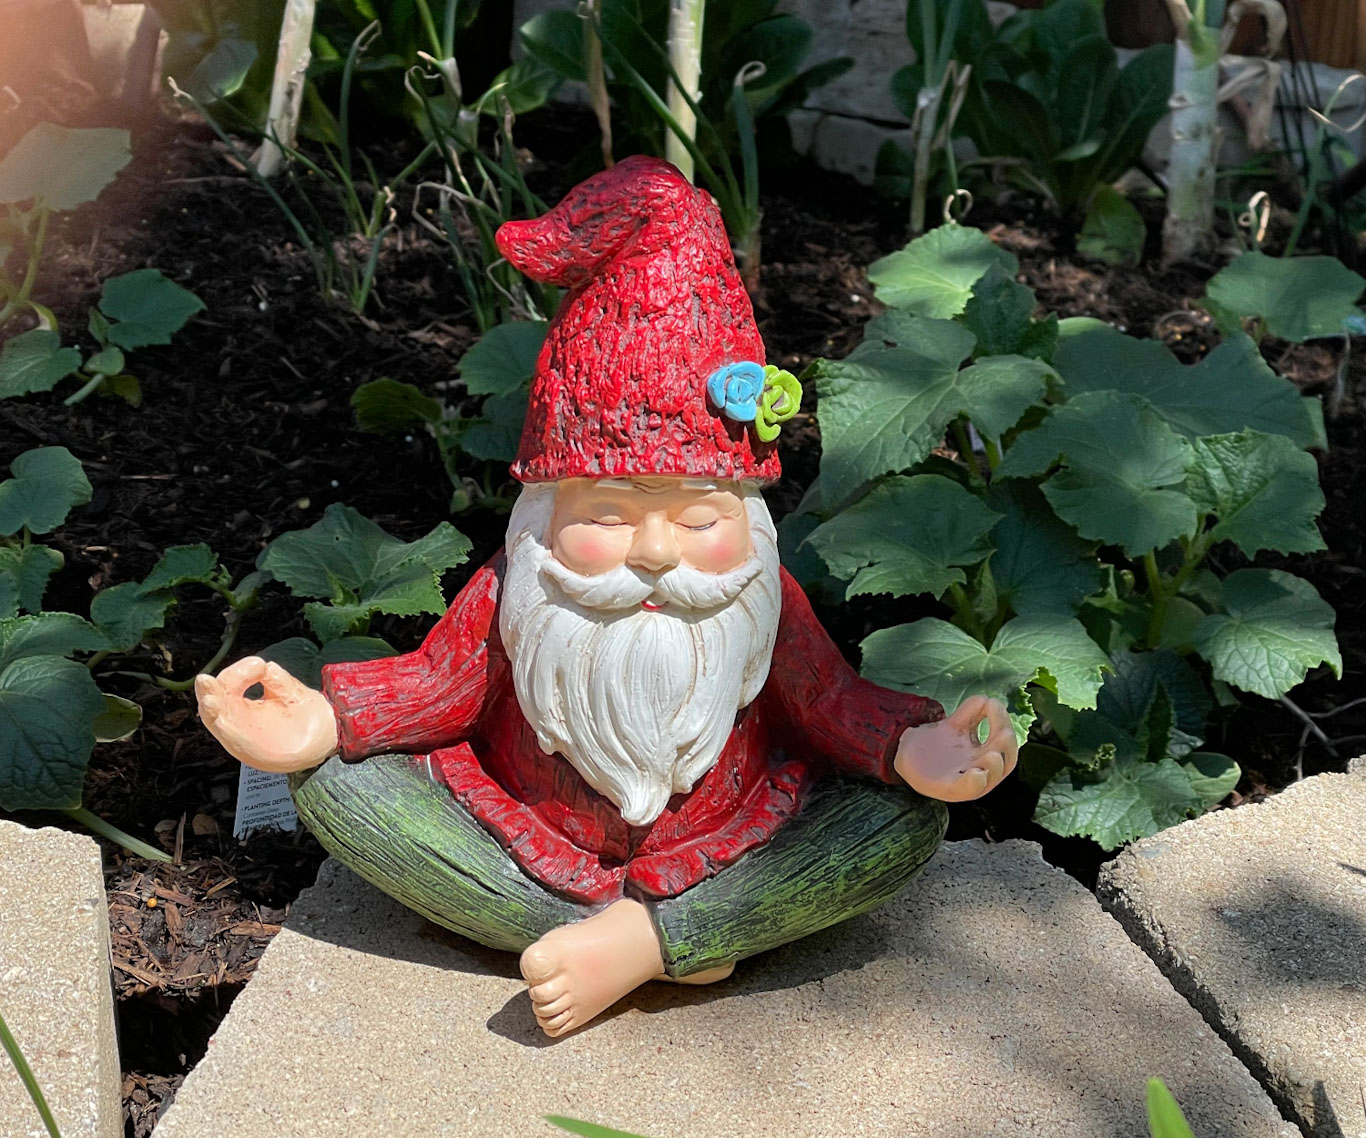 Just Meditating by the garden